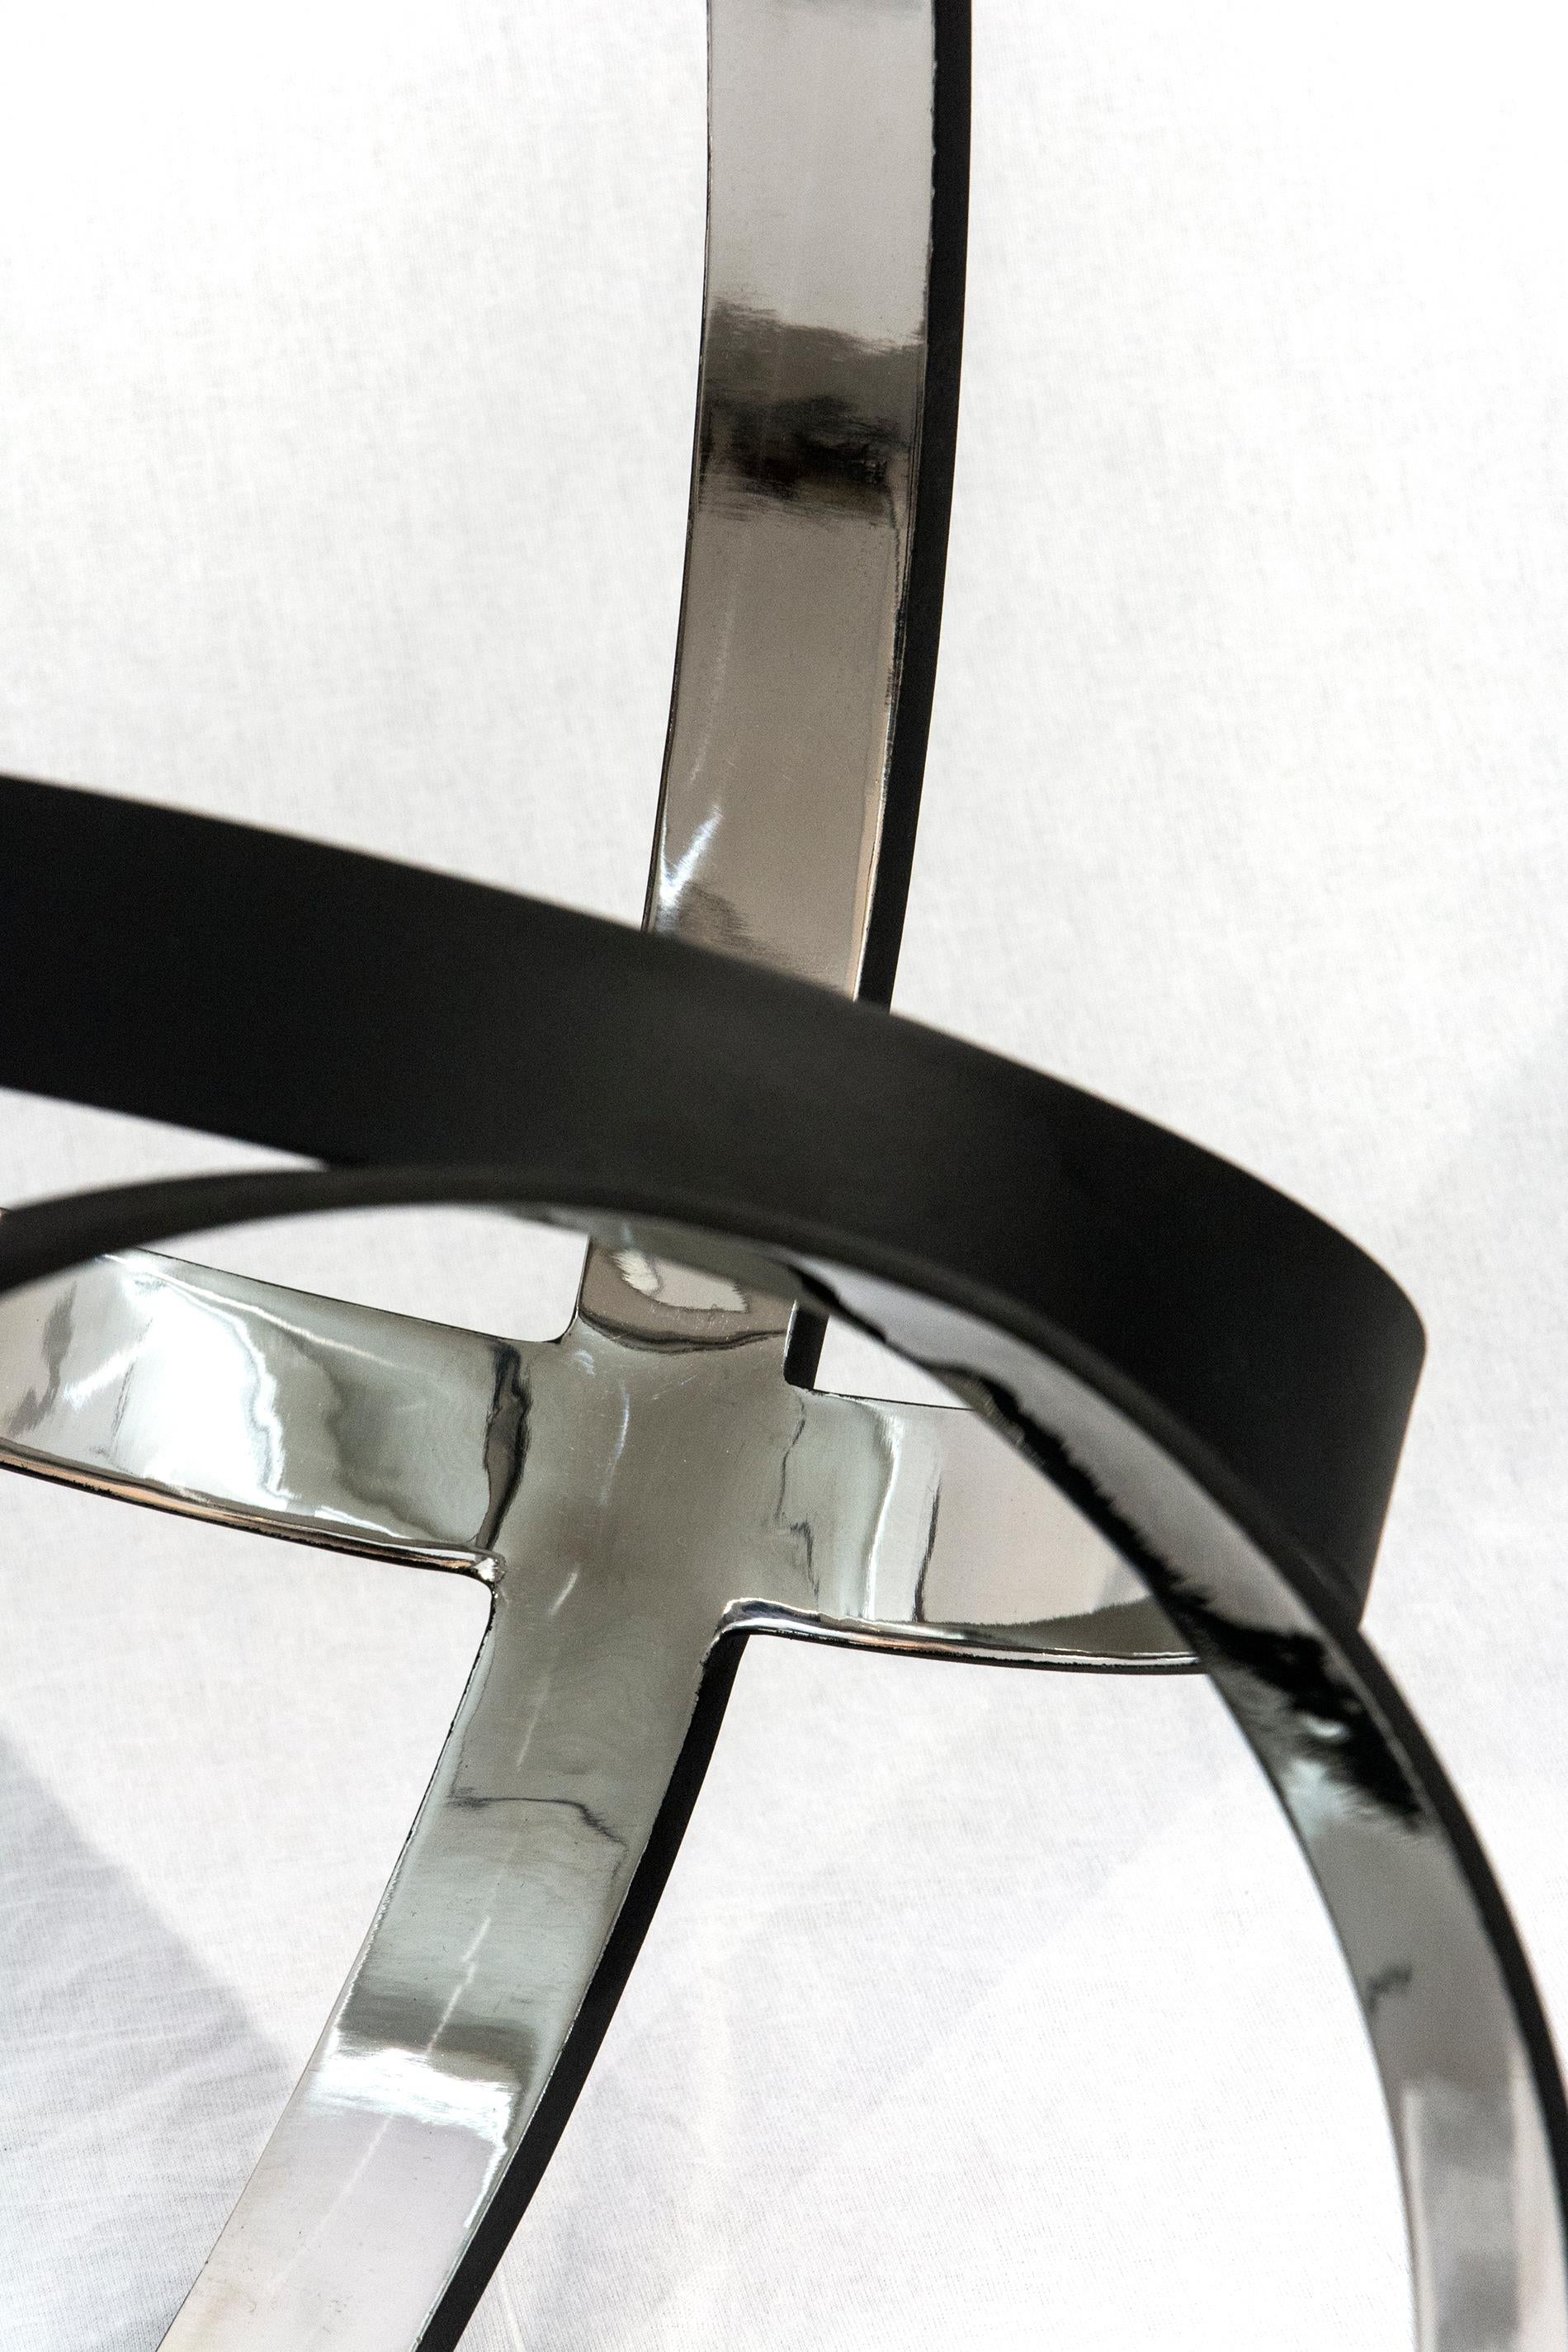 Temps Zero Black 6/10 - stainless steel, rings, table-top, abstract, sculpture For Sale 3